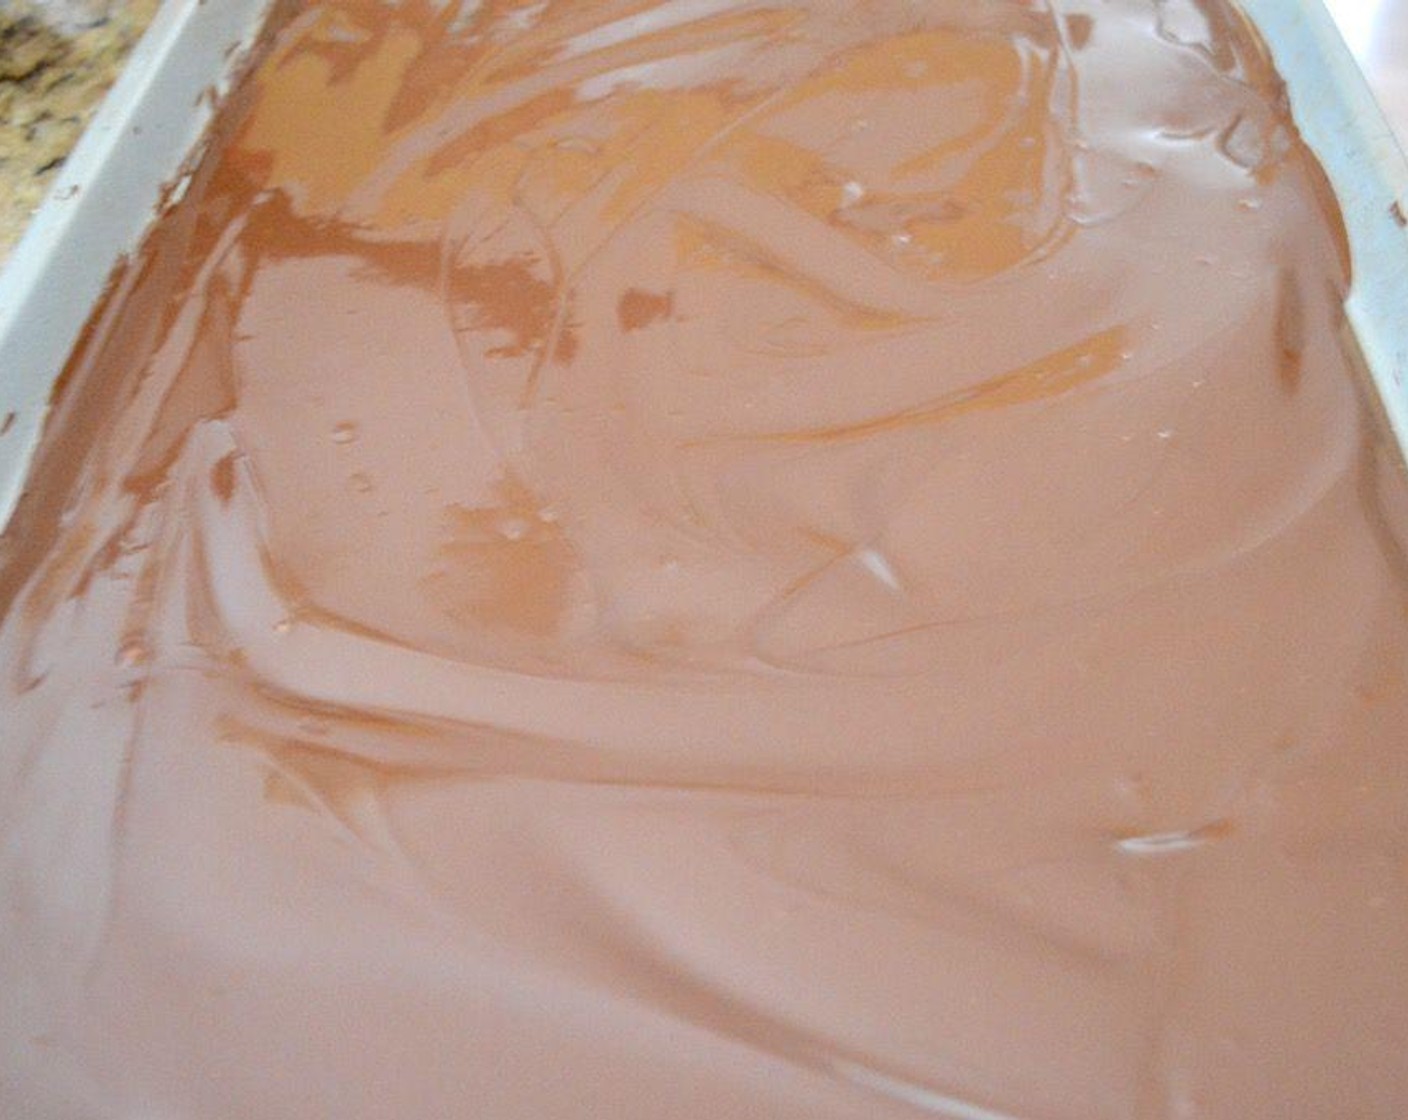 step 4 Stir that all together until the chocolate is completely smooth and shiny. Pour it out onto the lined sheet tray and smooth it out to be even. Set it aside to set for half an hour.